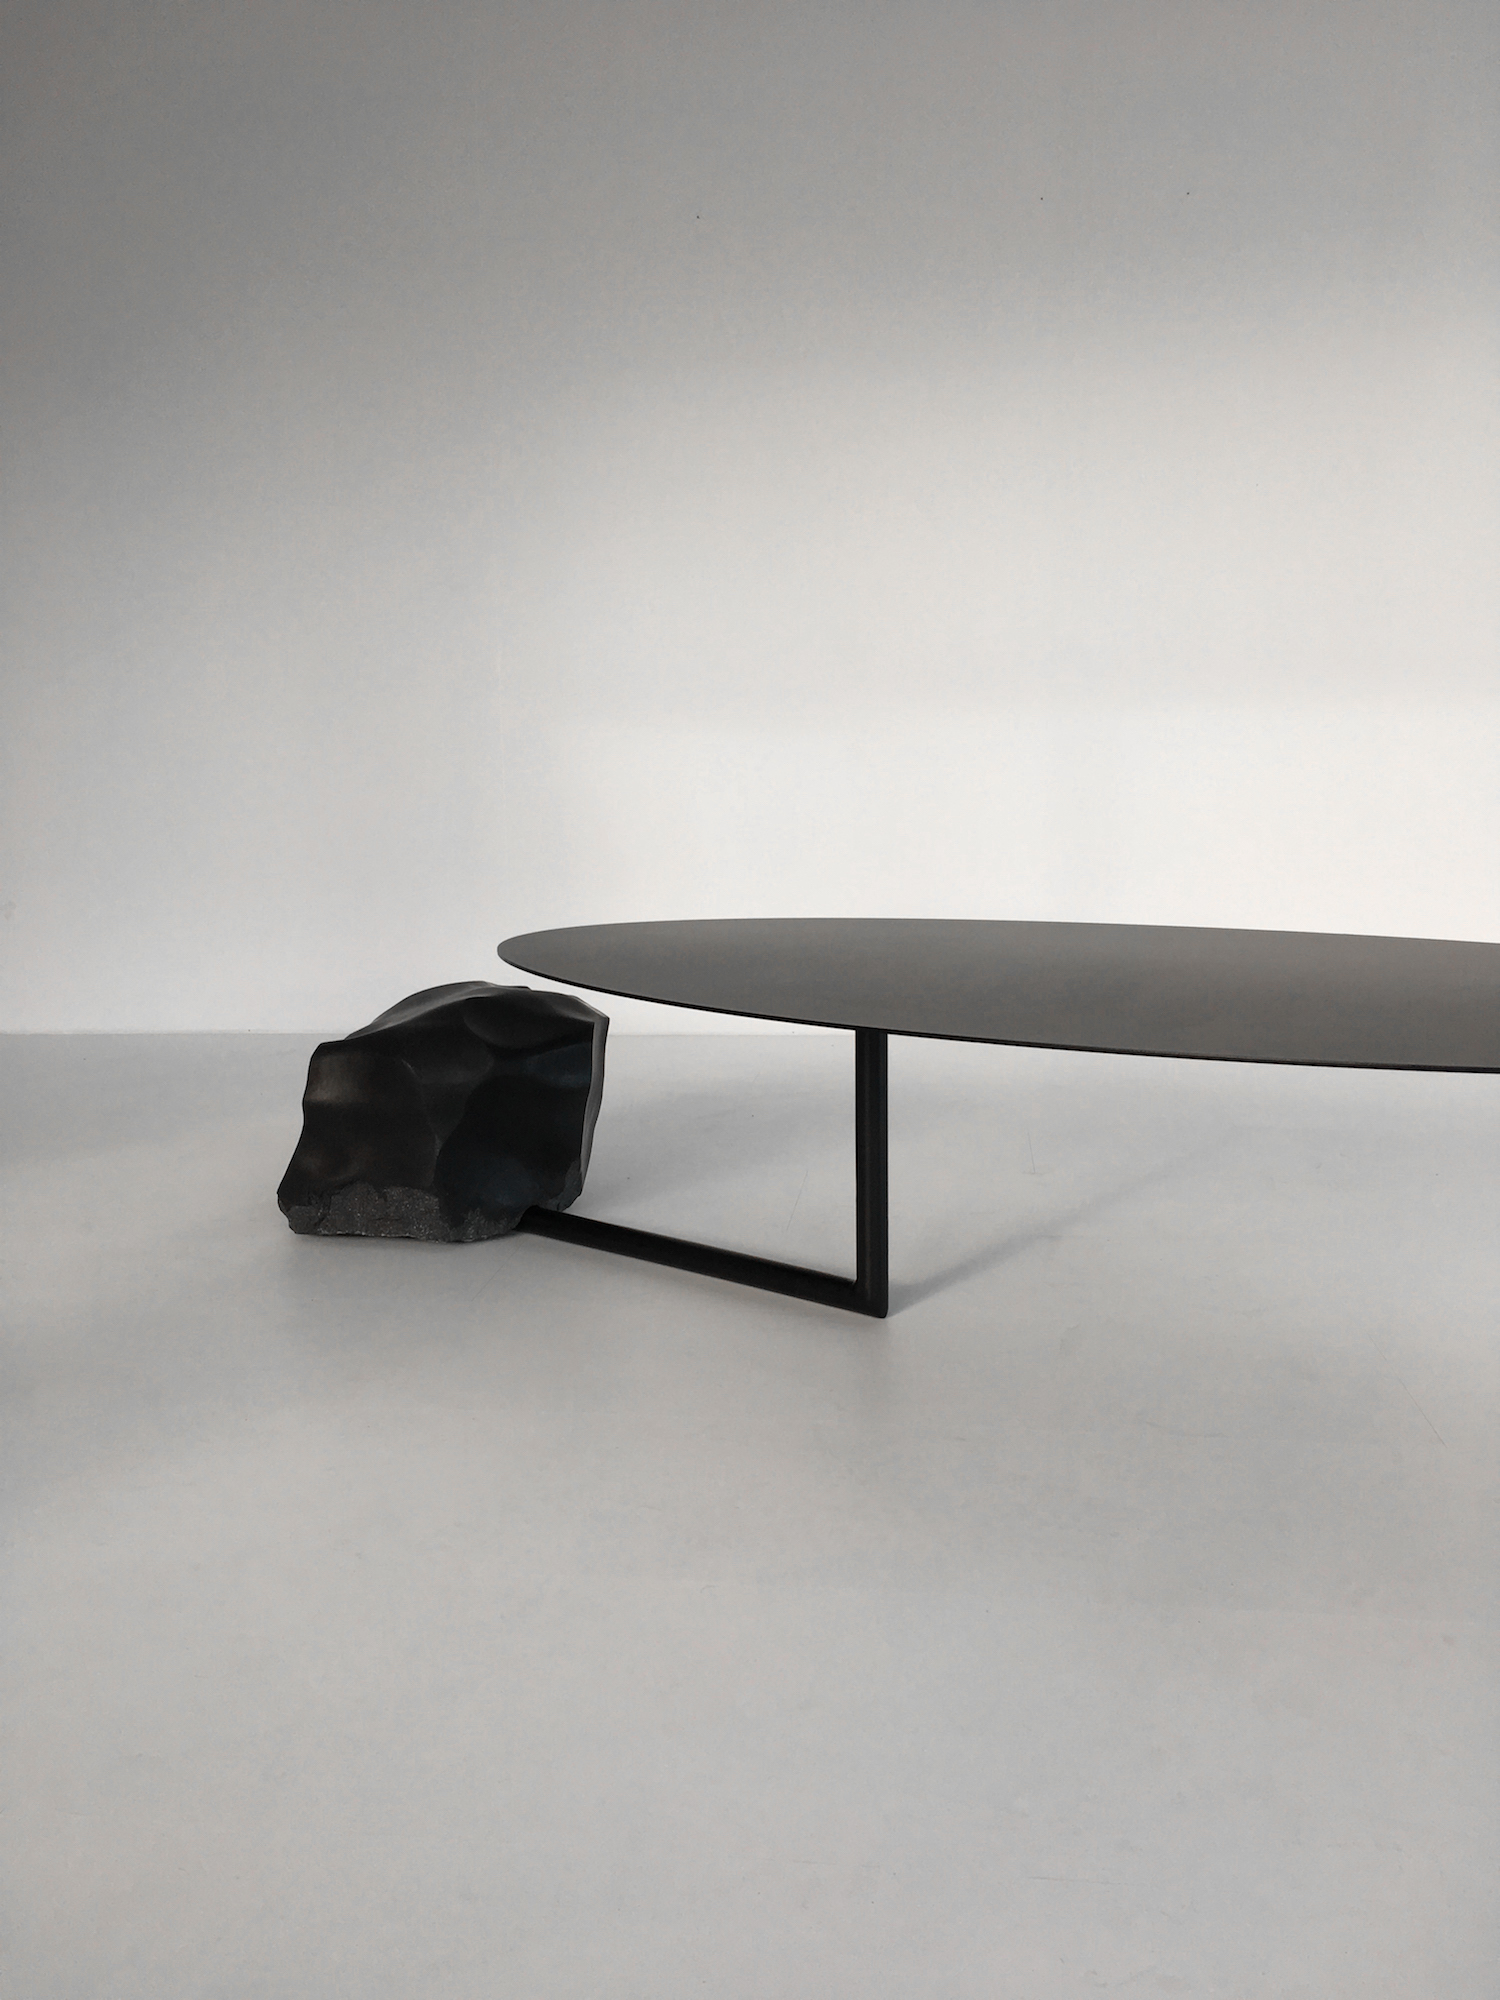 110 kgs Coffee Table by Max Enrich